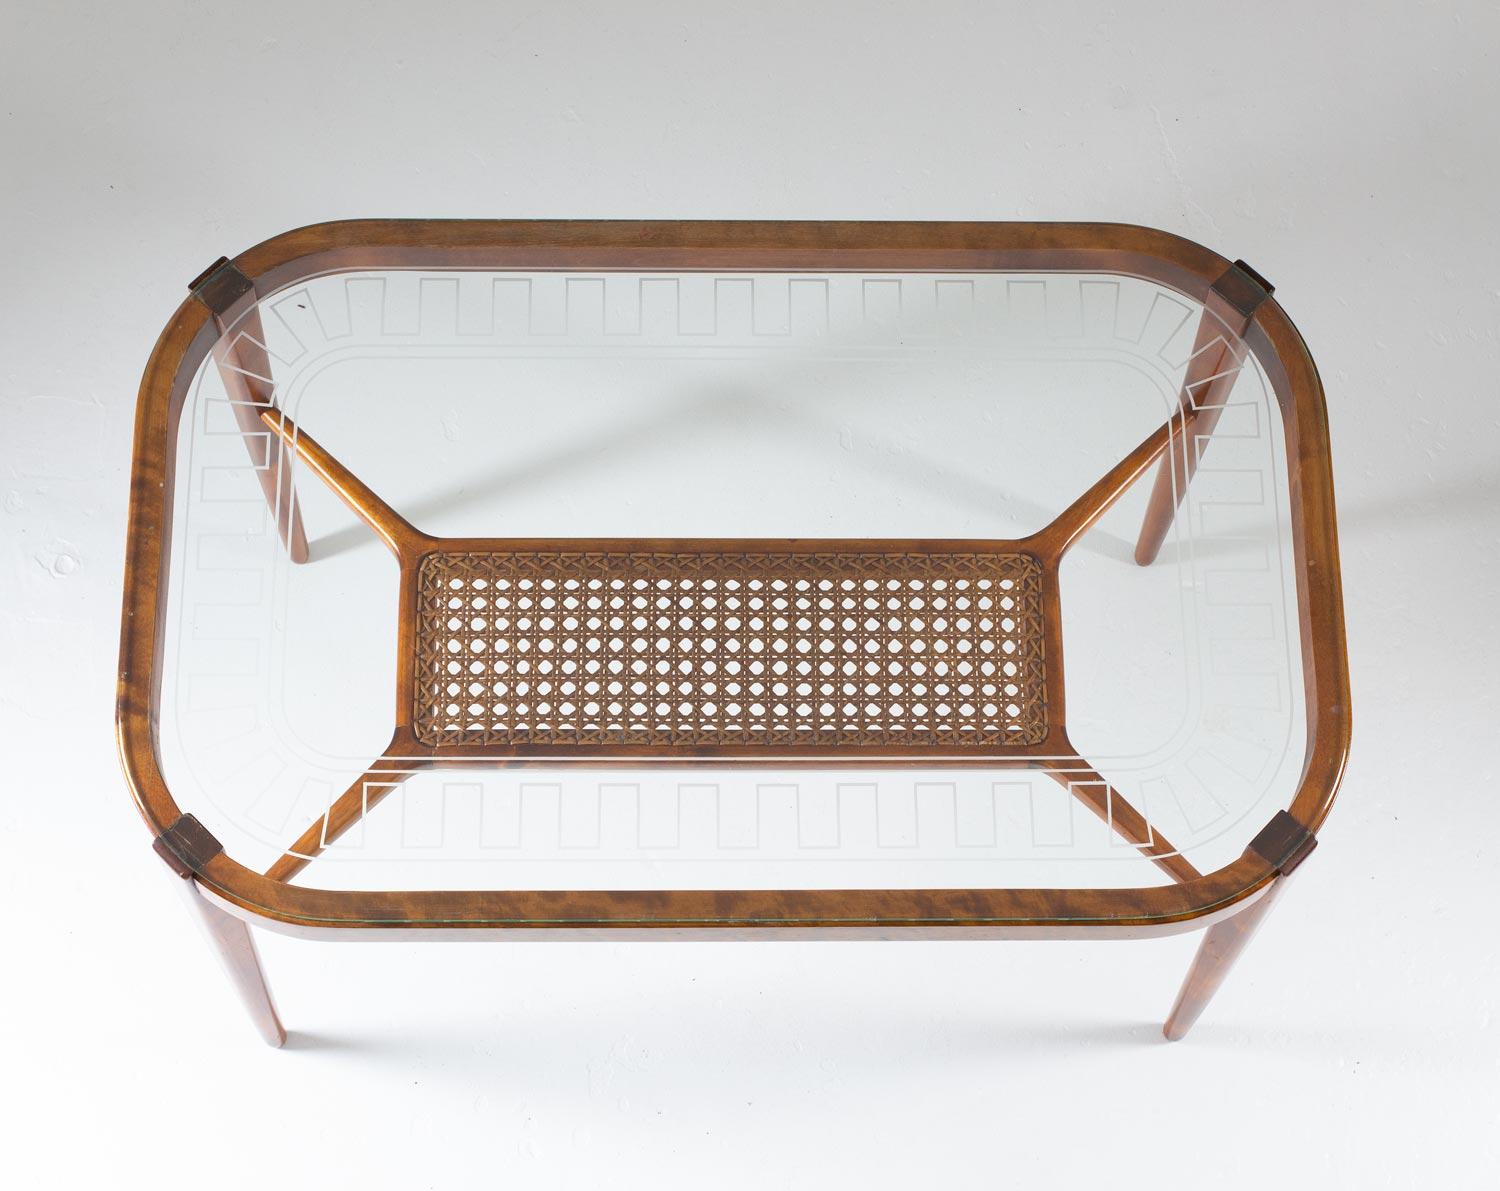 Swedish Modern Coffee Table in Birch, Glass and Rattan by Bodafors, 1940s For Sale 2